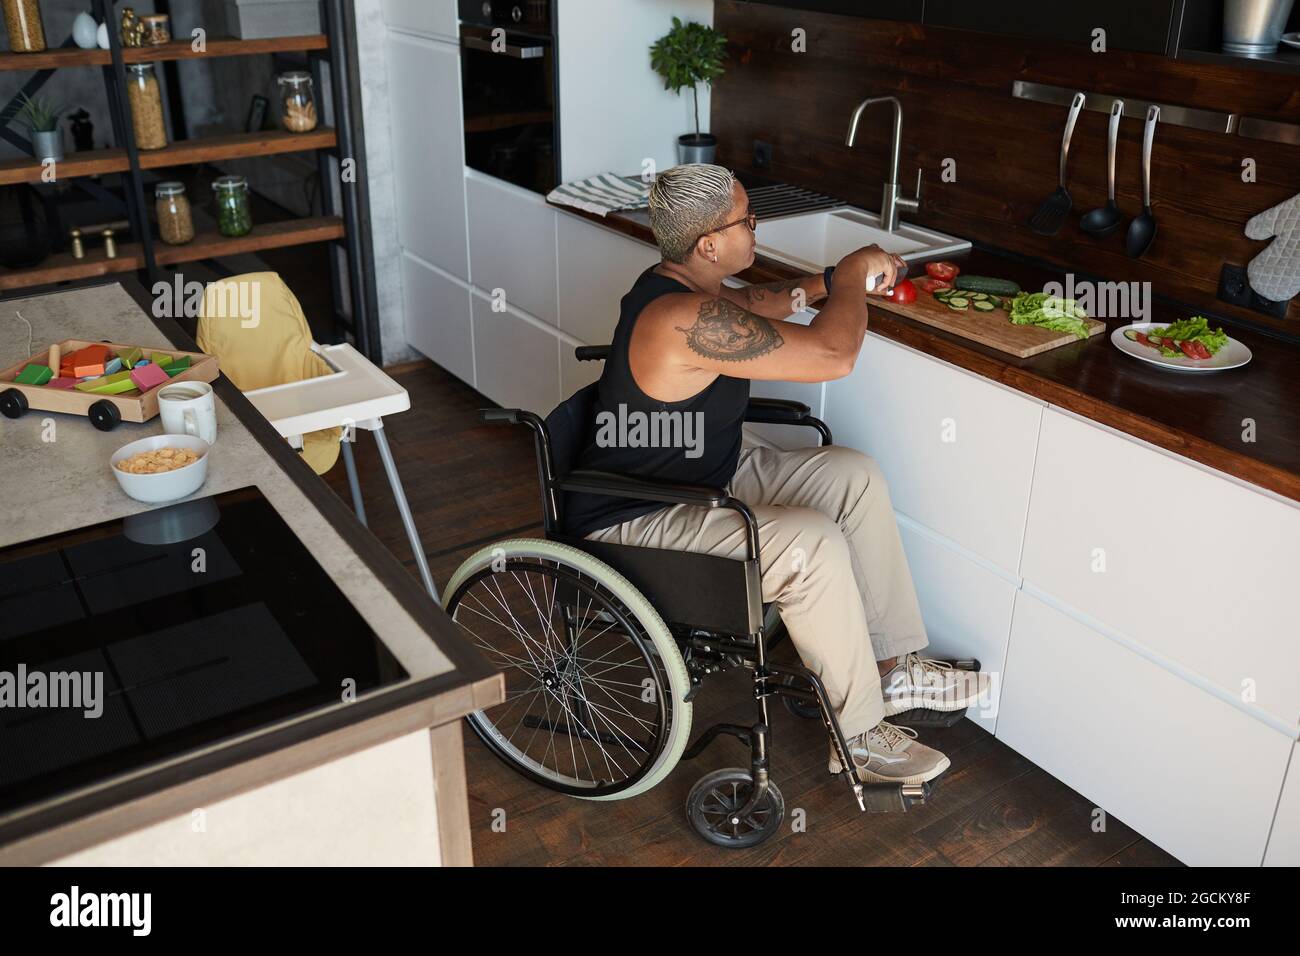 https://c8.alamy.com/comp/2GCKY8F/high-angle-portrait-of-contemporary-tattooed-woman-in-wheelchair-cooking-salad-at-home-in-kitchen-copy-space-2GCKY8F.jpg